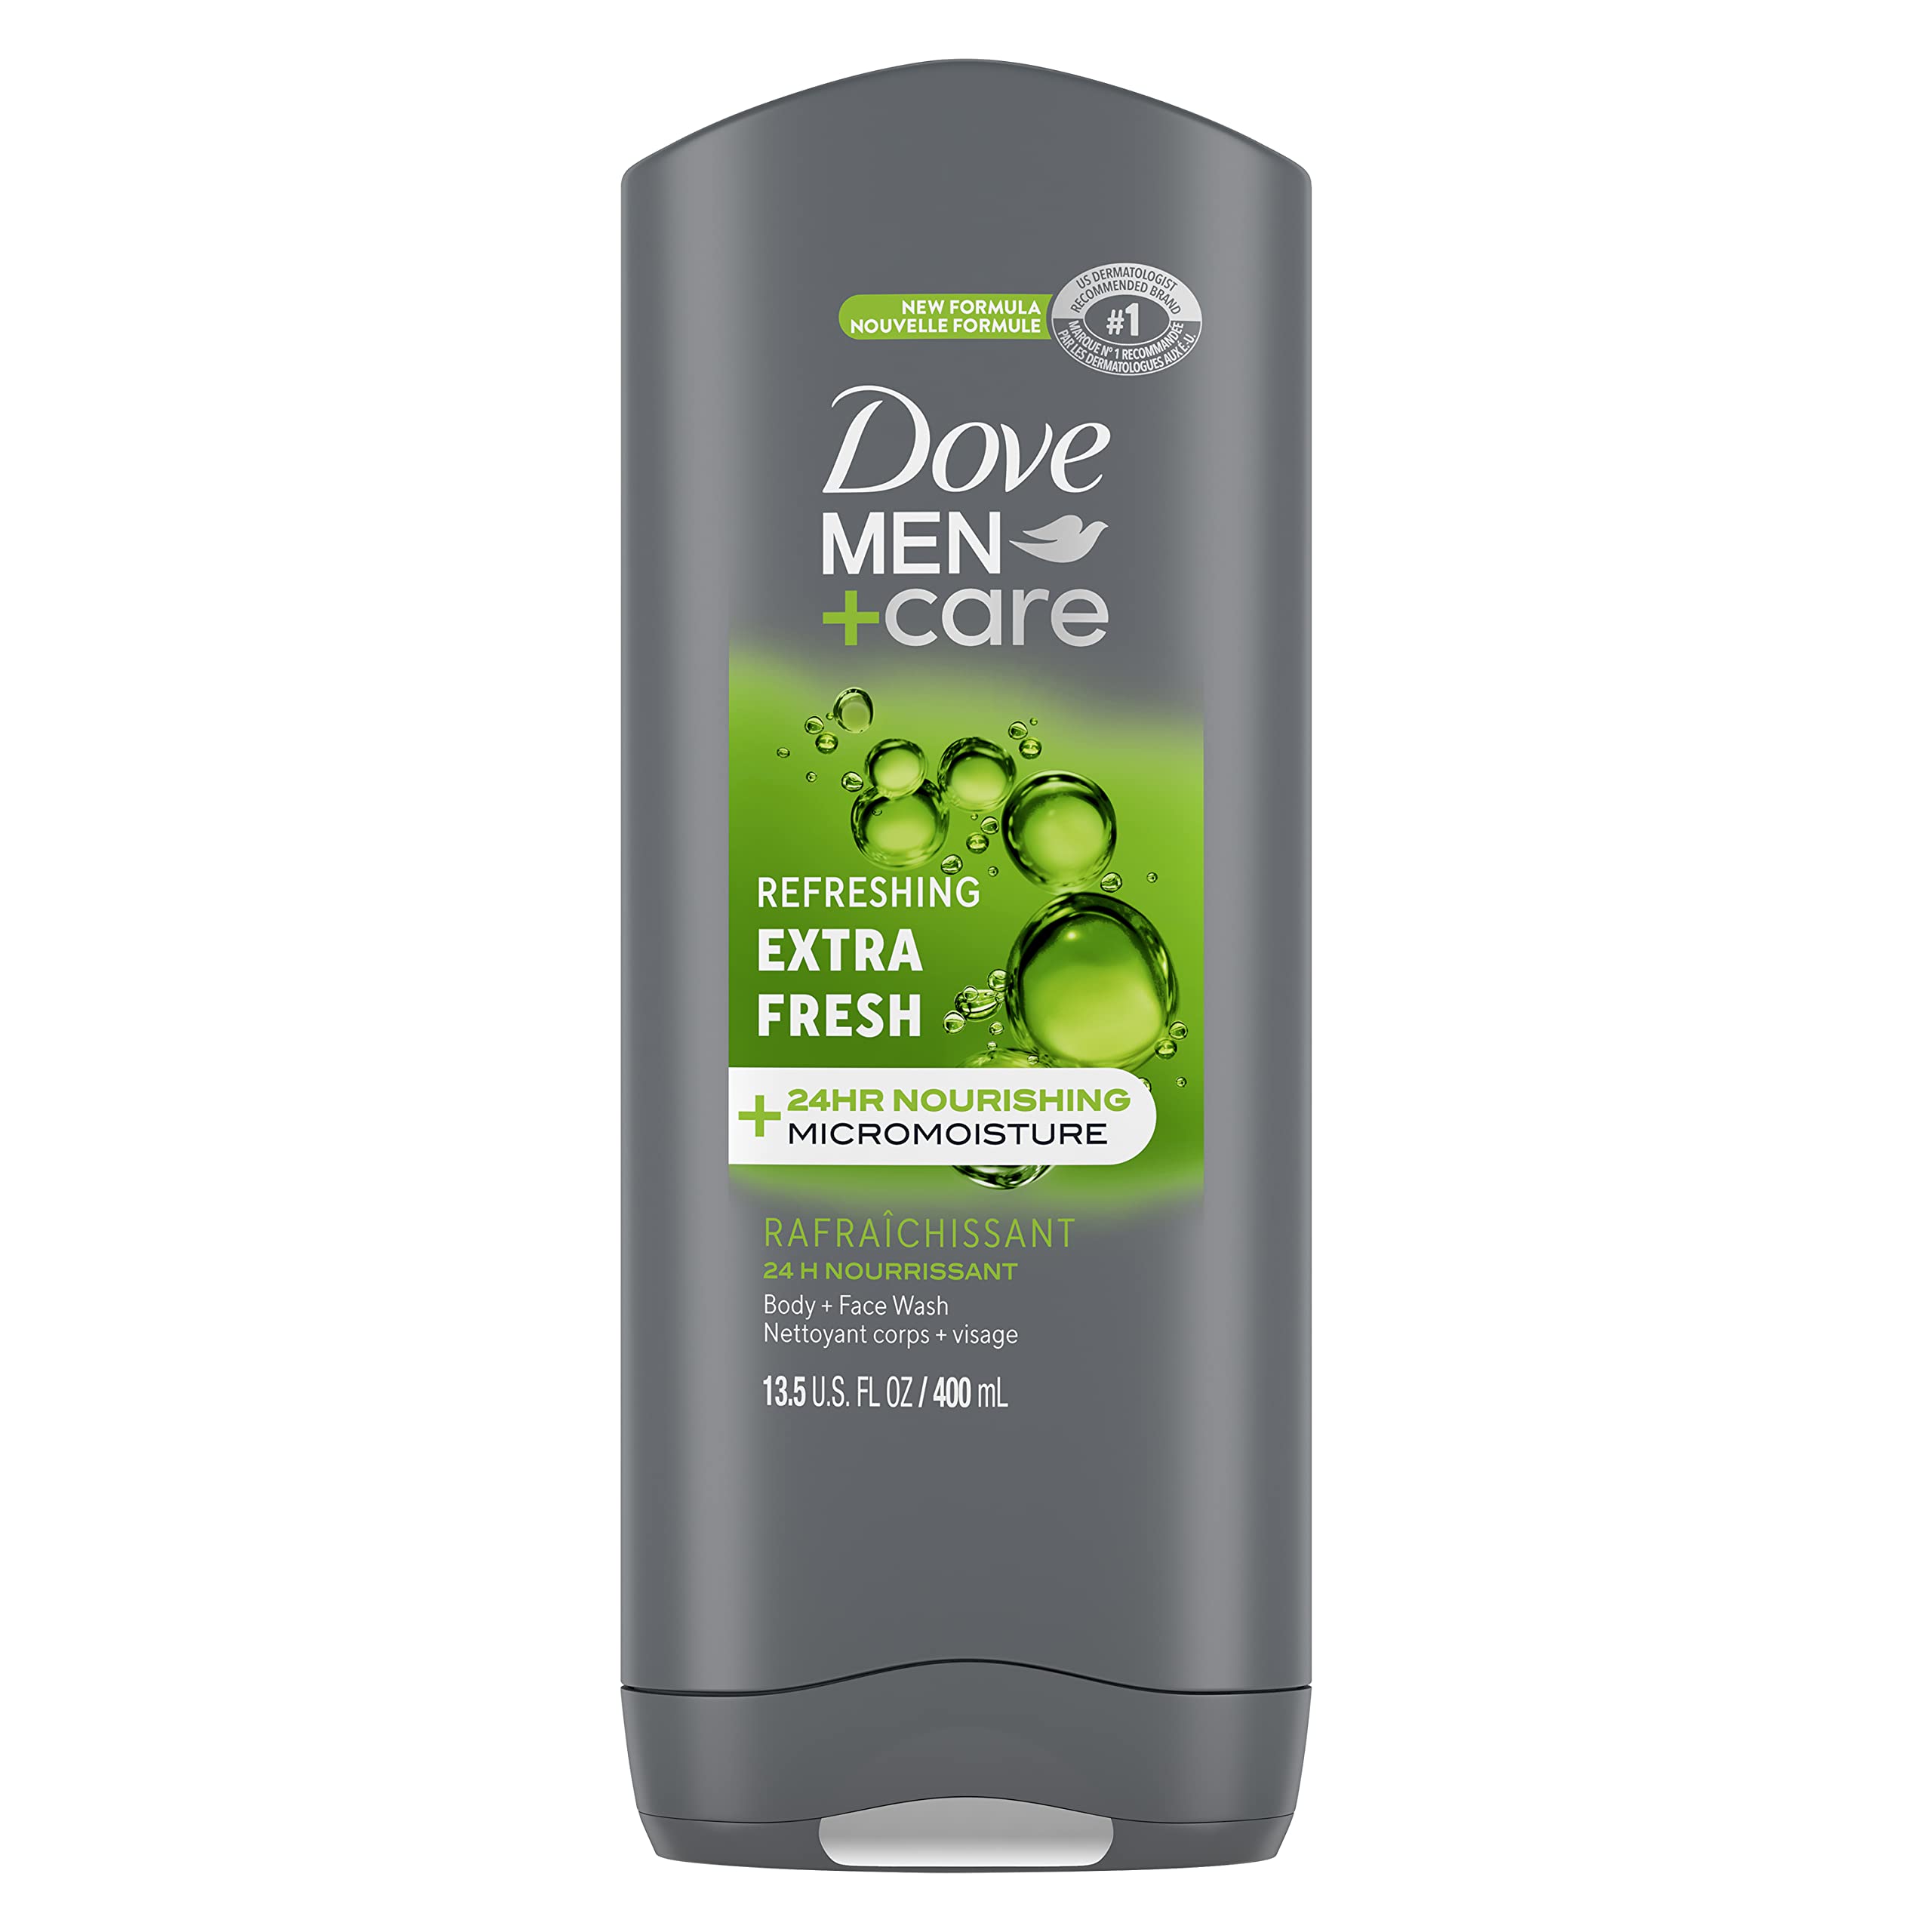 Dove Men + Care Body and Face Wash Refreshing Extra Fresh with 24-Hour Nourishing Micromoisture Technology Body Wash for Men, 13.5 oz